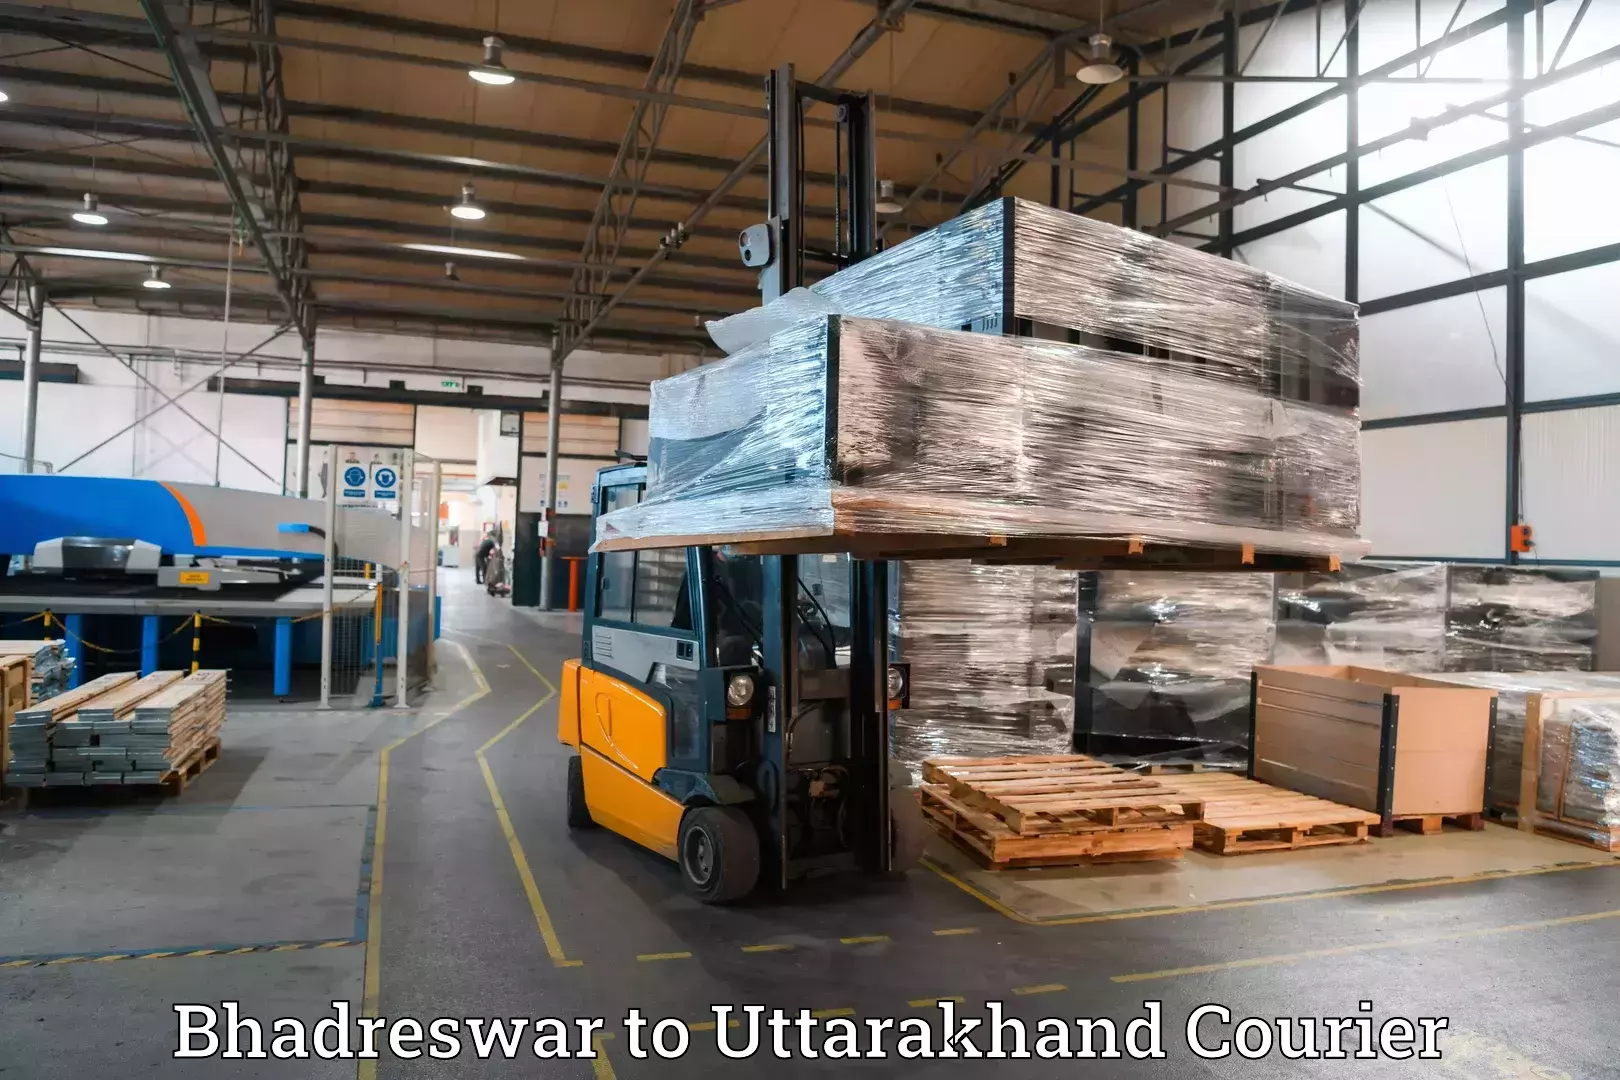 Baggage delivery management Bhadreswar to Someshwar